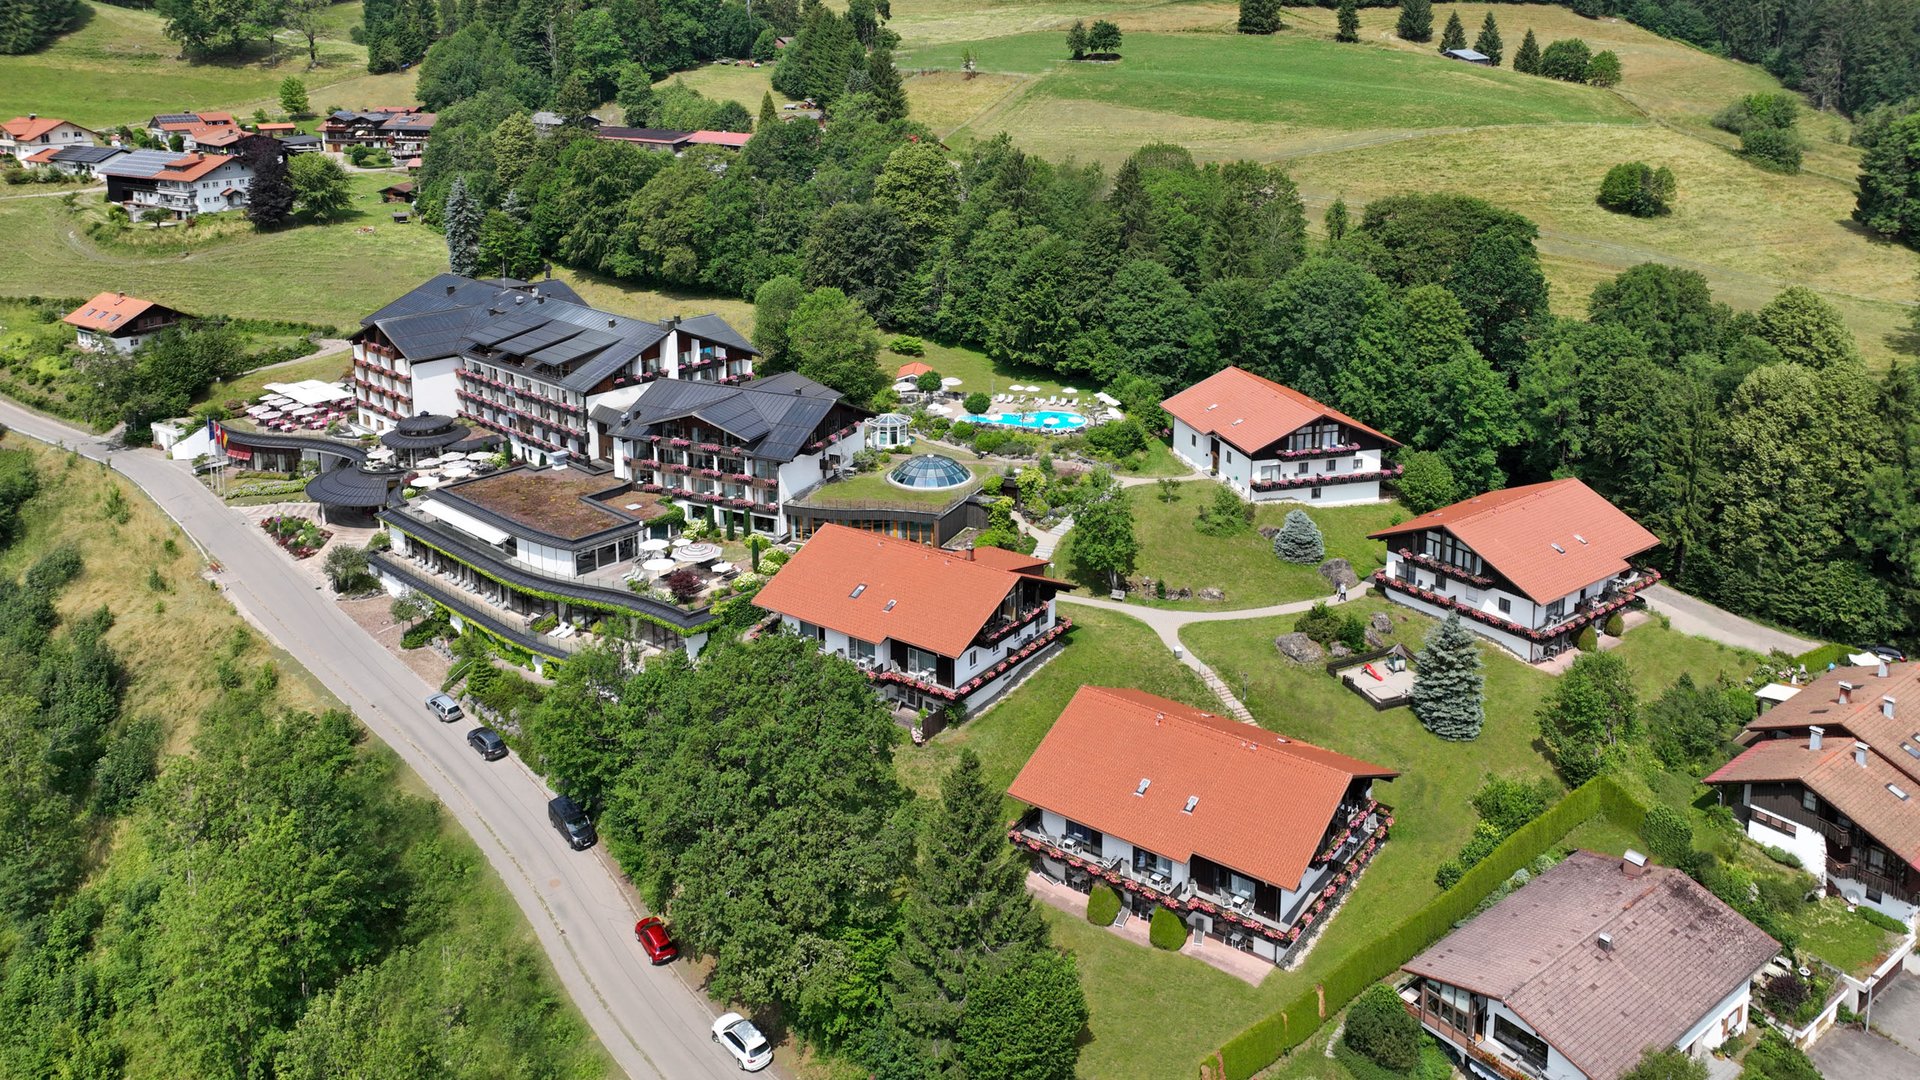 A look inside our hotel in Allgäu with pools